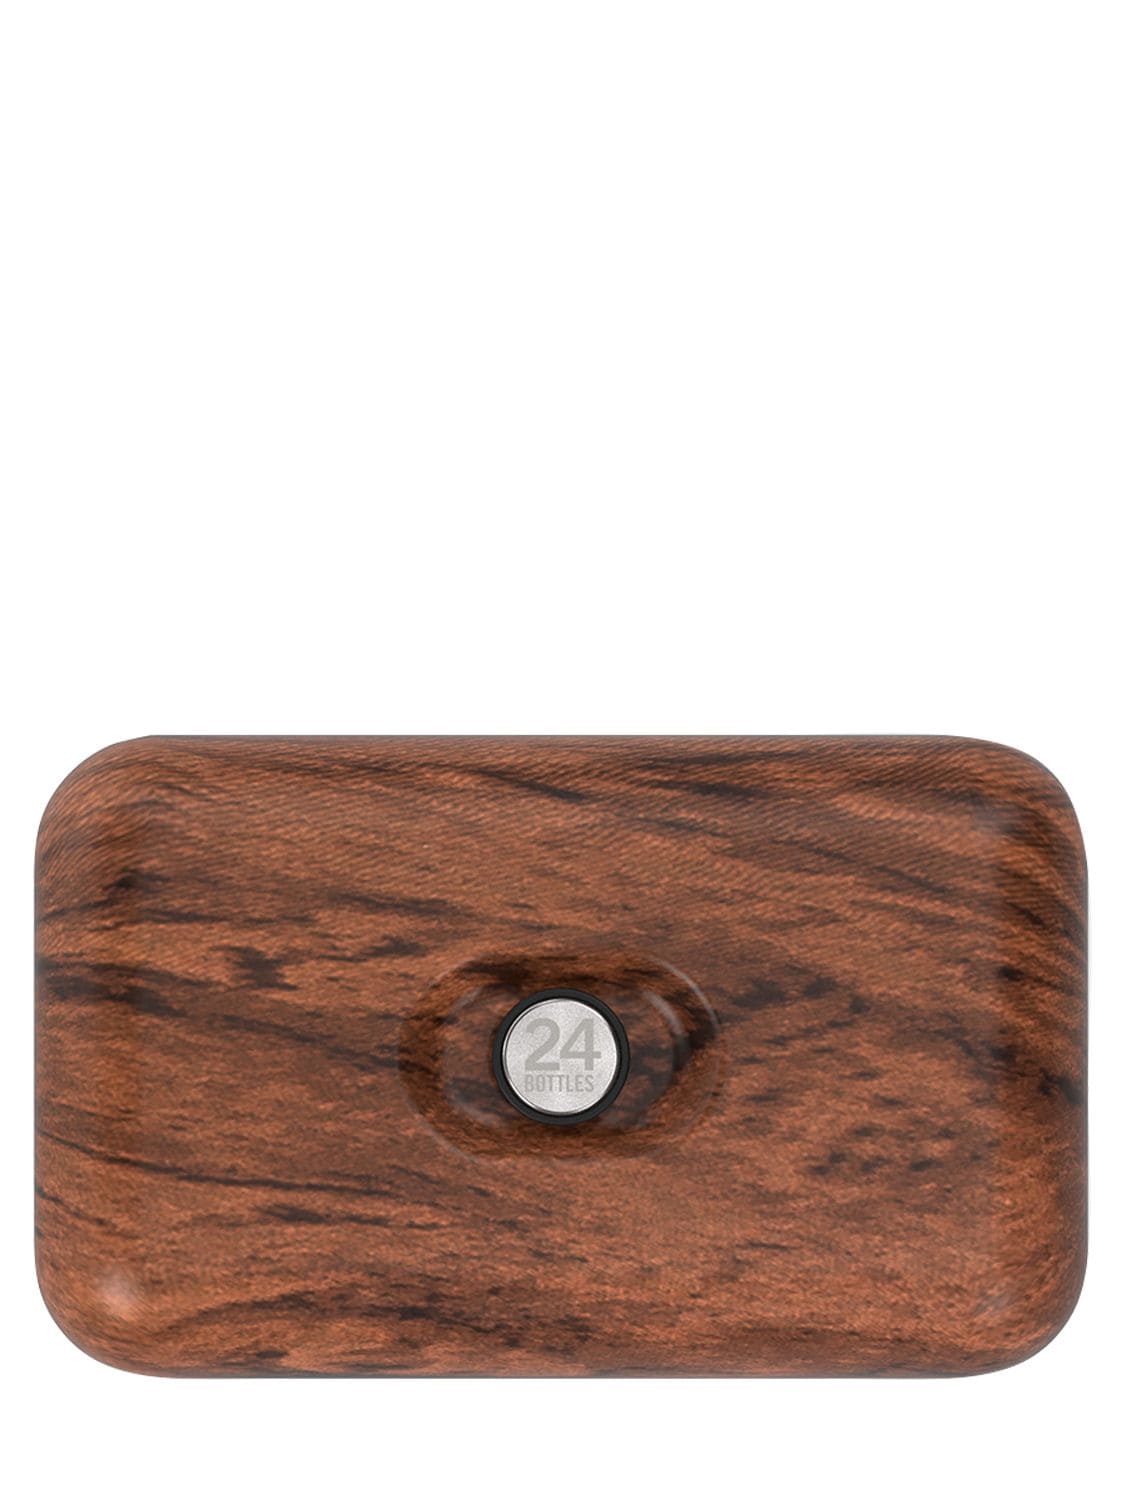 Image of Sequoia Wood Lunchbox